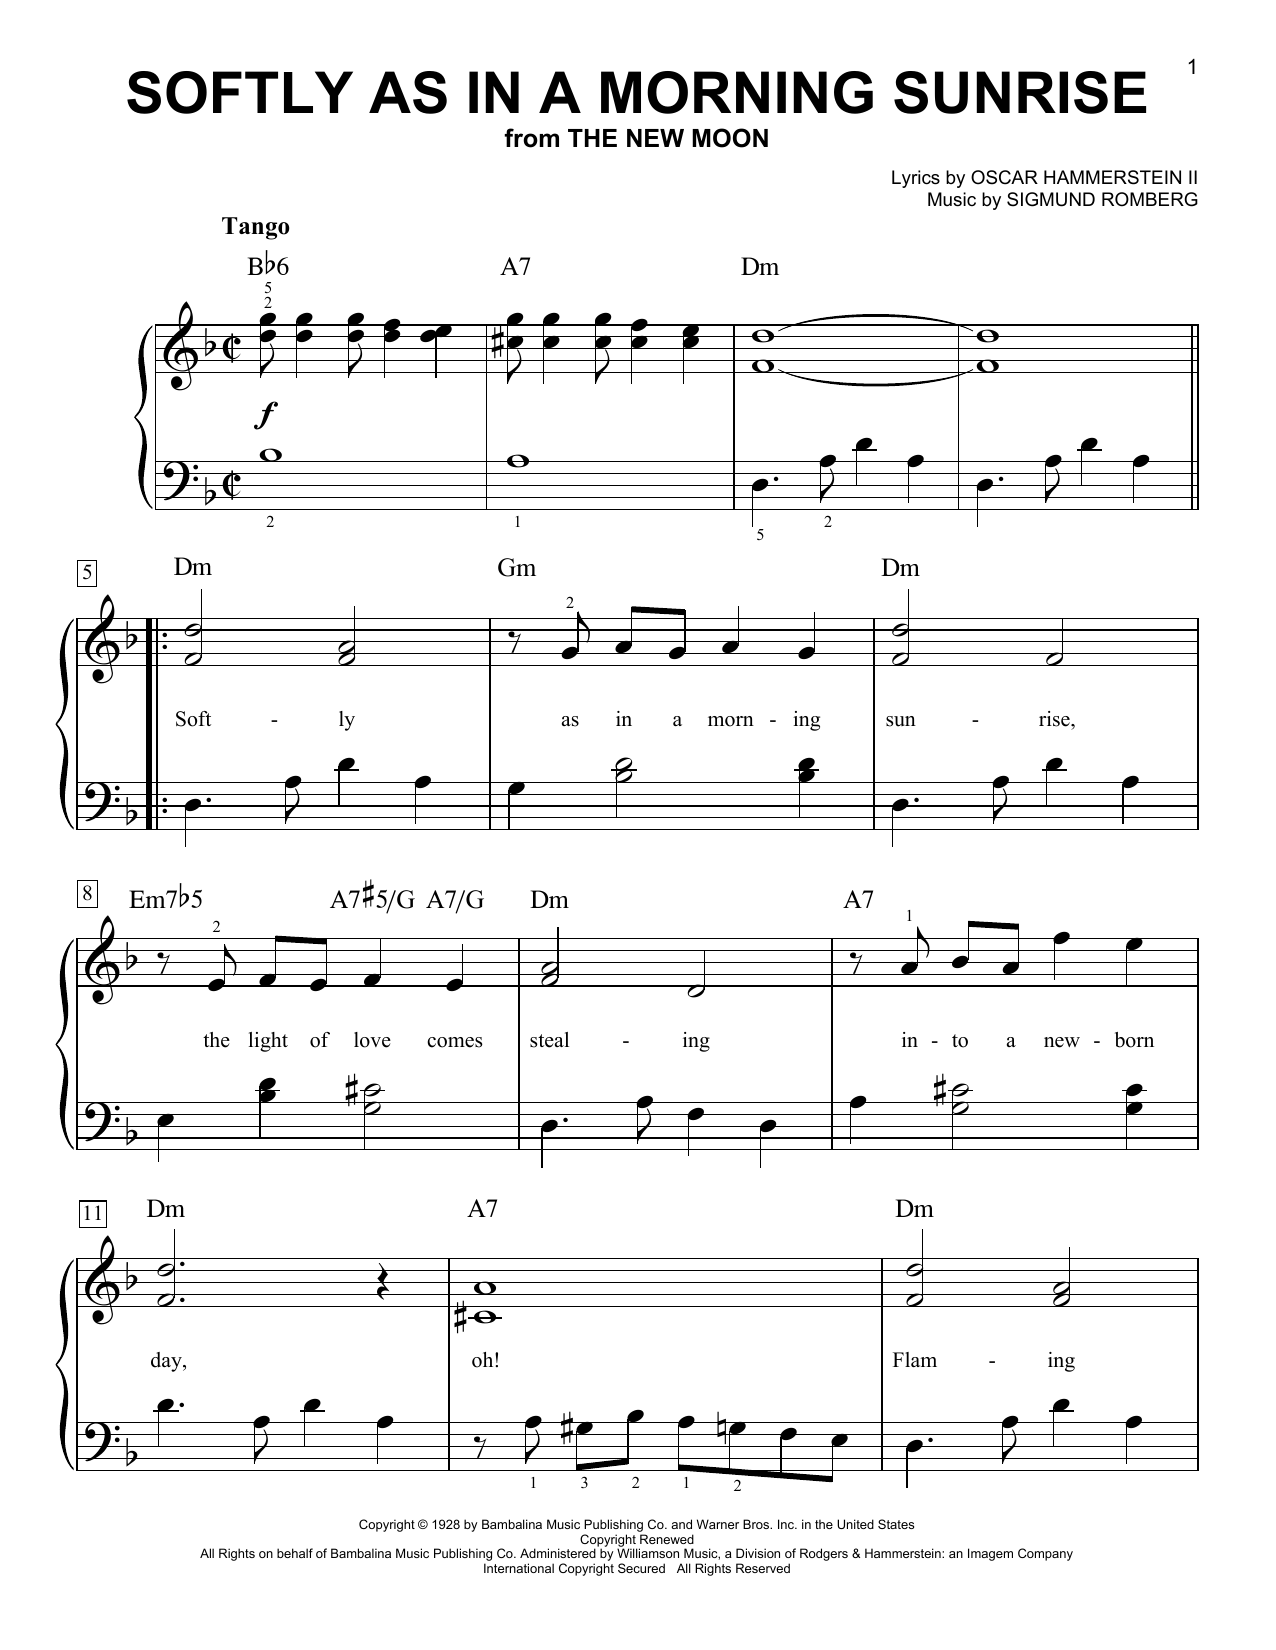 Sigmund Romberg Softly As In A Morning Sunrise sheet music notes and chords. Download Printable PDF.